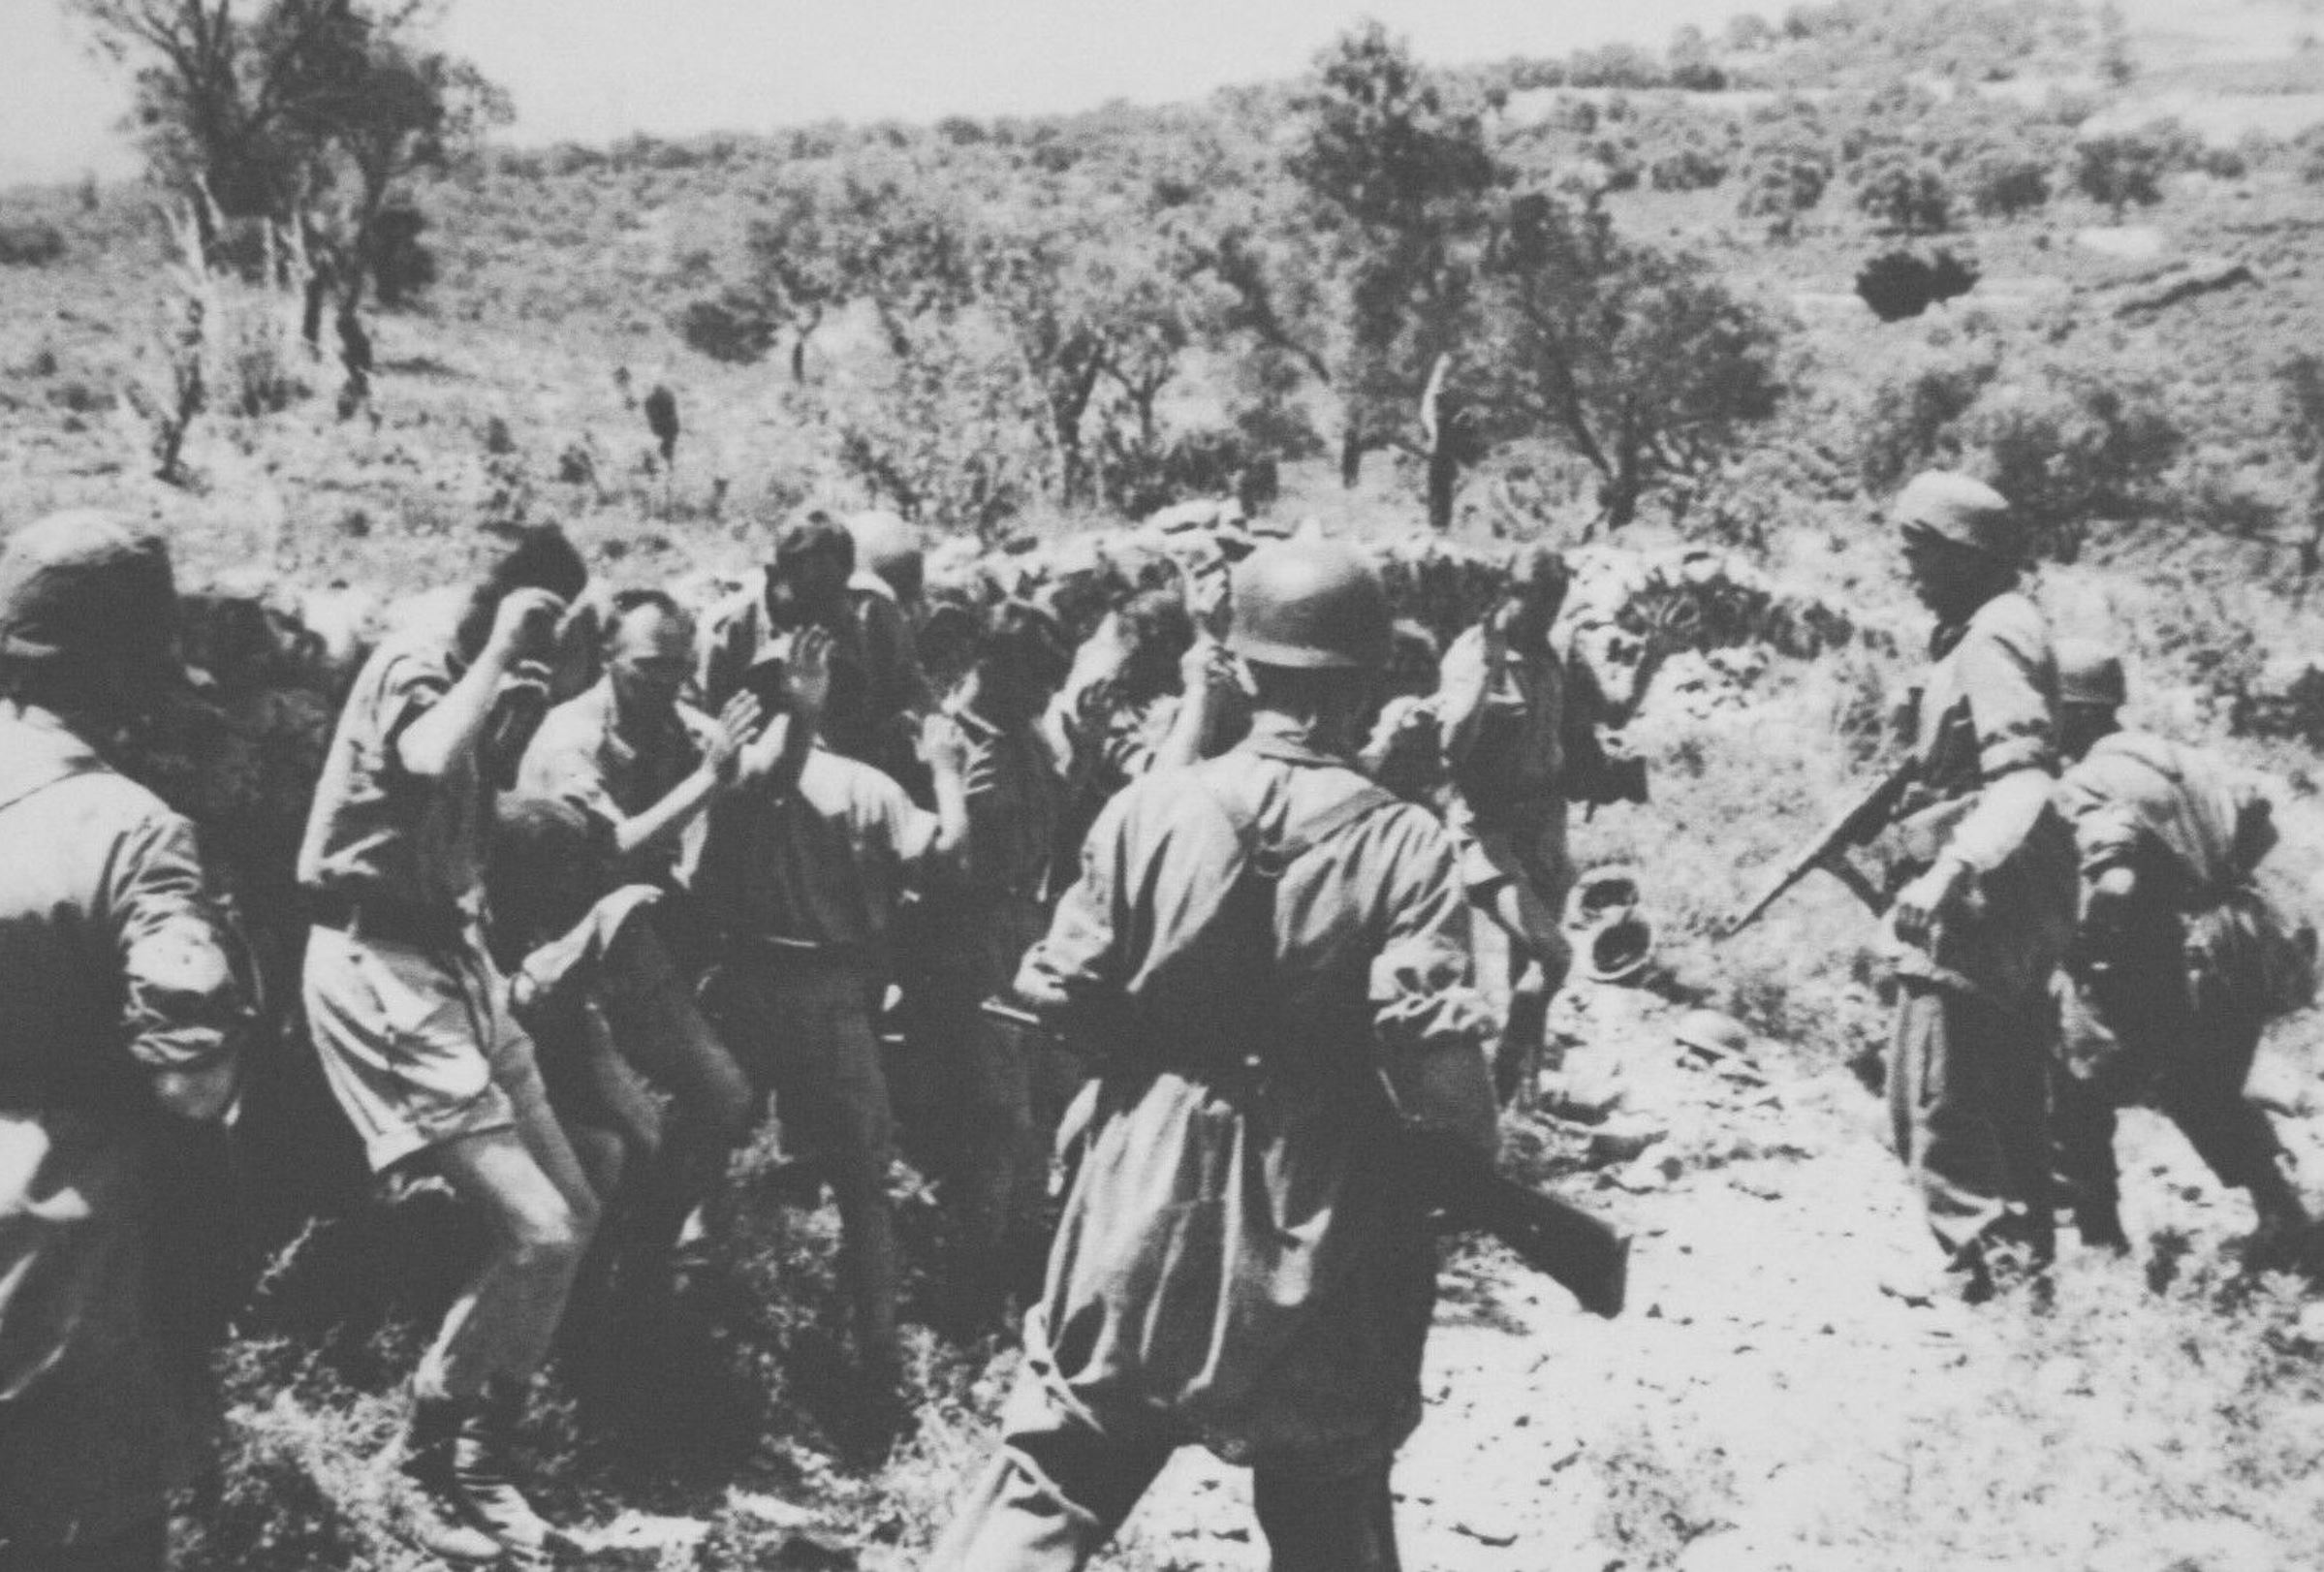 German paratroopers capturing British soldiers during the Battle for Crete May 1941 ebay 02